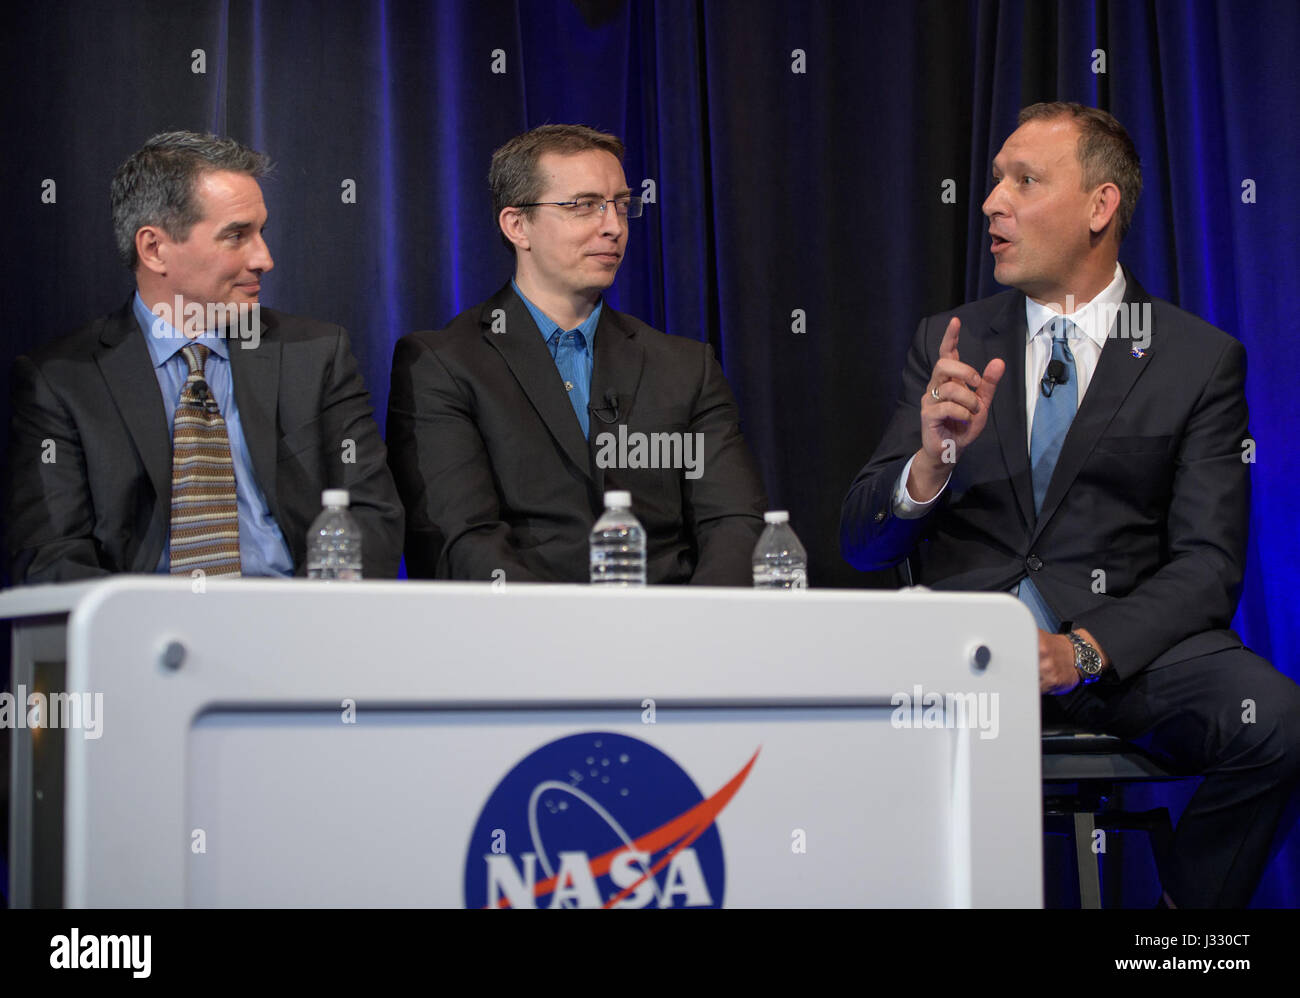 Manager of NASA's Spitzer Science Center at Caltech/IPAC, Pasadena, California Sean Carey, left, University of Liege in Belgium Astronomer Michael Gillon, center, and NASA Associate Administrator of the Science Mission Directorate Thomas Zurbuchen present research findings during a TRAPPIST-1 planets briefing, Wednesday, Feb. 22, 2017 at NASA Headquarters in Washington. Researchers revealed the first known system of seven Earth-size planets around a single star called TRAPPIST-1. Photo Credit: (NASA/Bill Ingalls)  More: exoplanets.nasa.gov/trappist1/ ( https://exoplanets.nasa.gov/trappist1/ ) Stock Photo